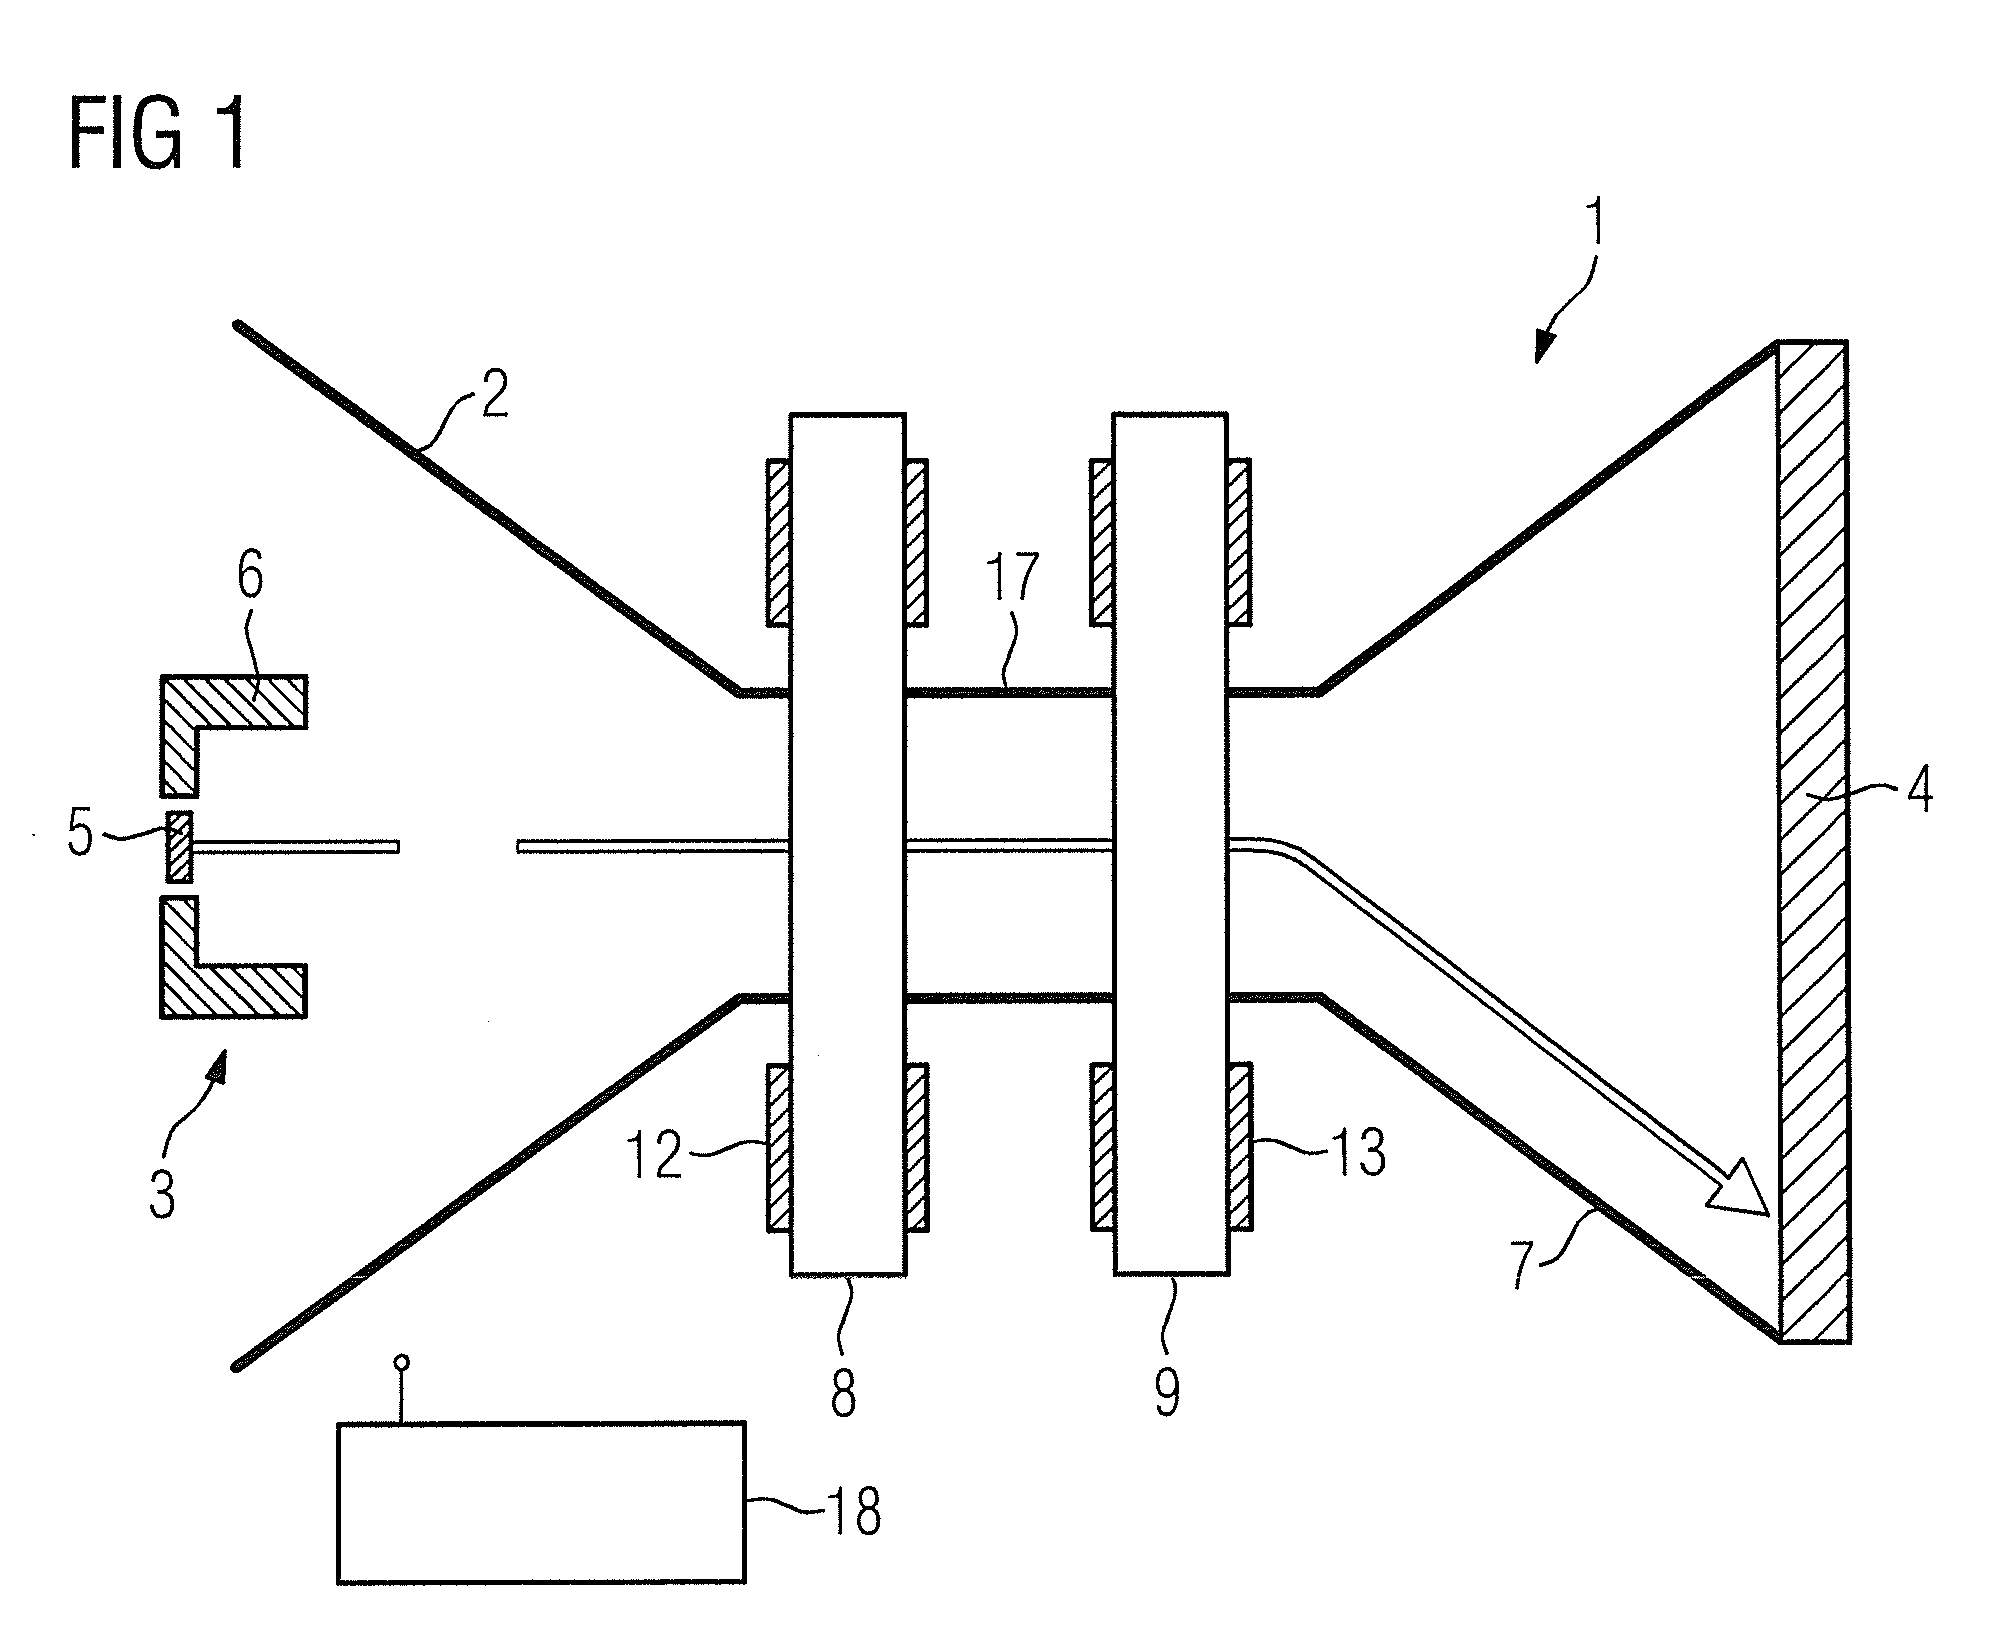 X-ray tube and method to operate an x-ray tube